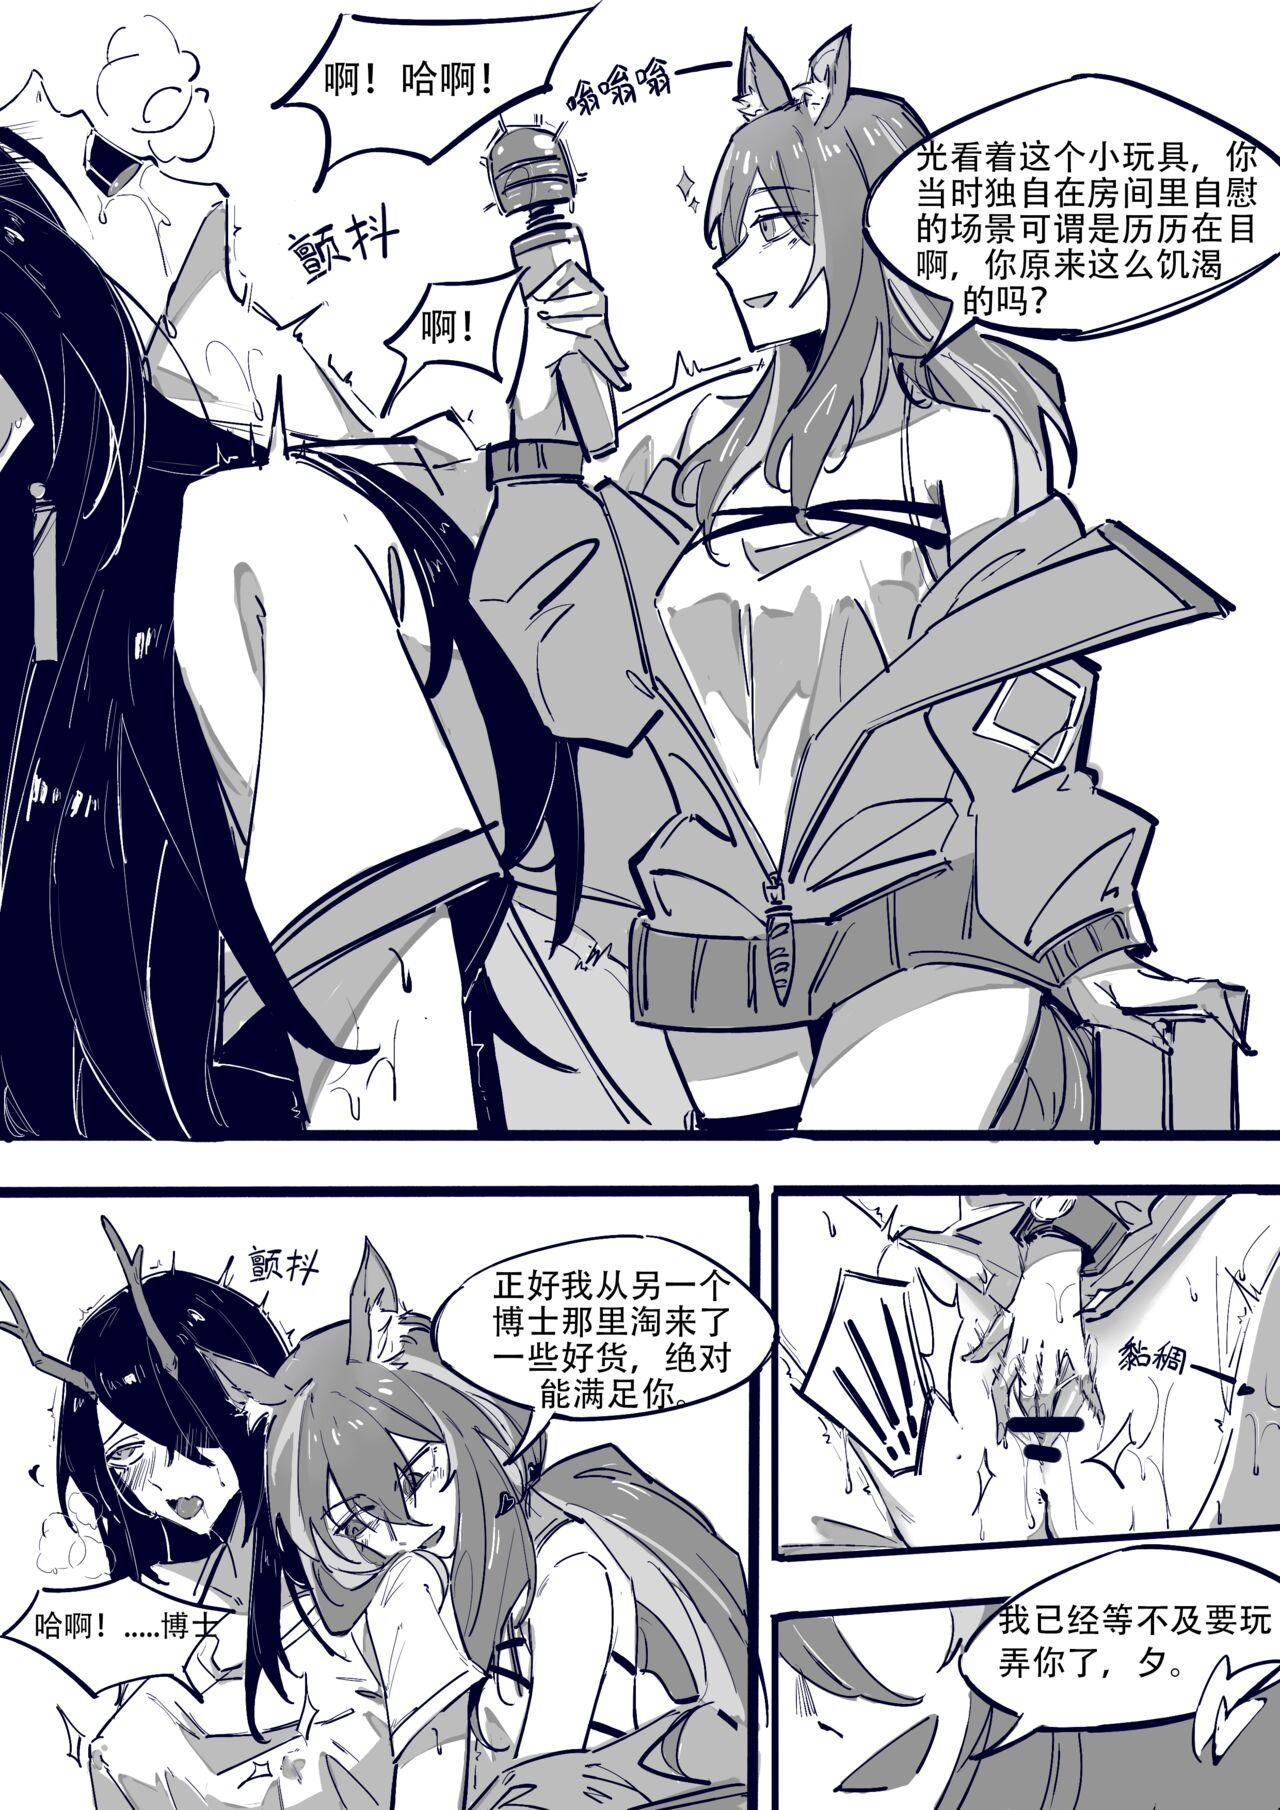 Tight Cunt 博士大战龙泡泡（上篇） - Arknights Big - Page 4